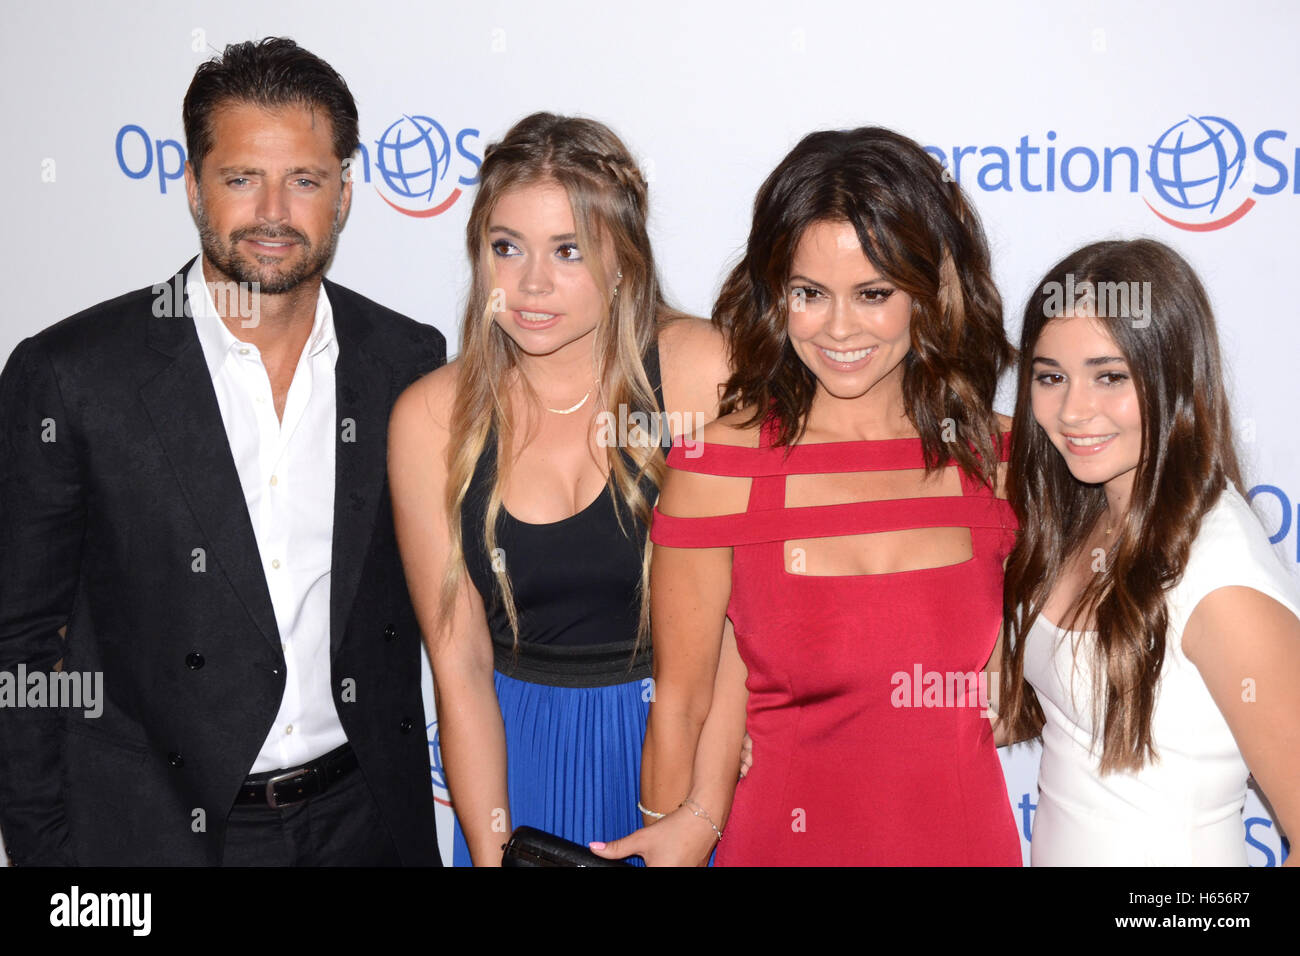 David Charvet (l) and Brooke Burke-Charvet (2nd from right) attends Operation Smile at the Beverly Wilshire Hotel, Beverly Hills California on October 2, 2015. Stock Photo